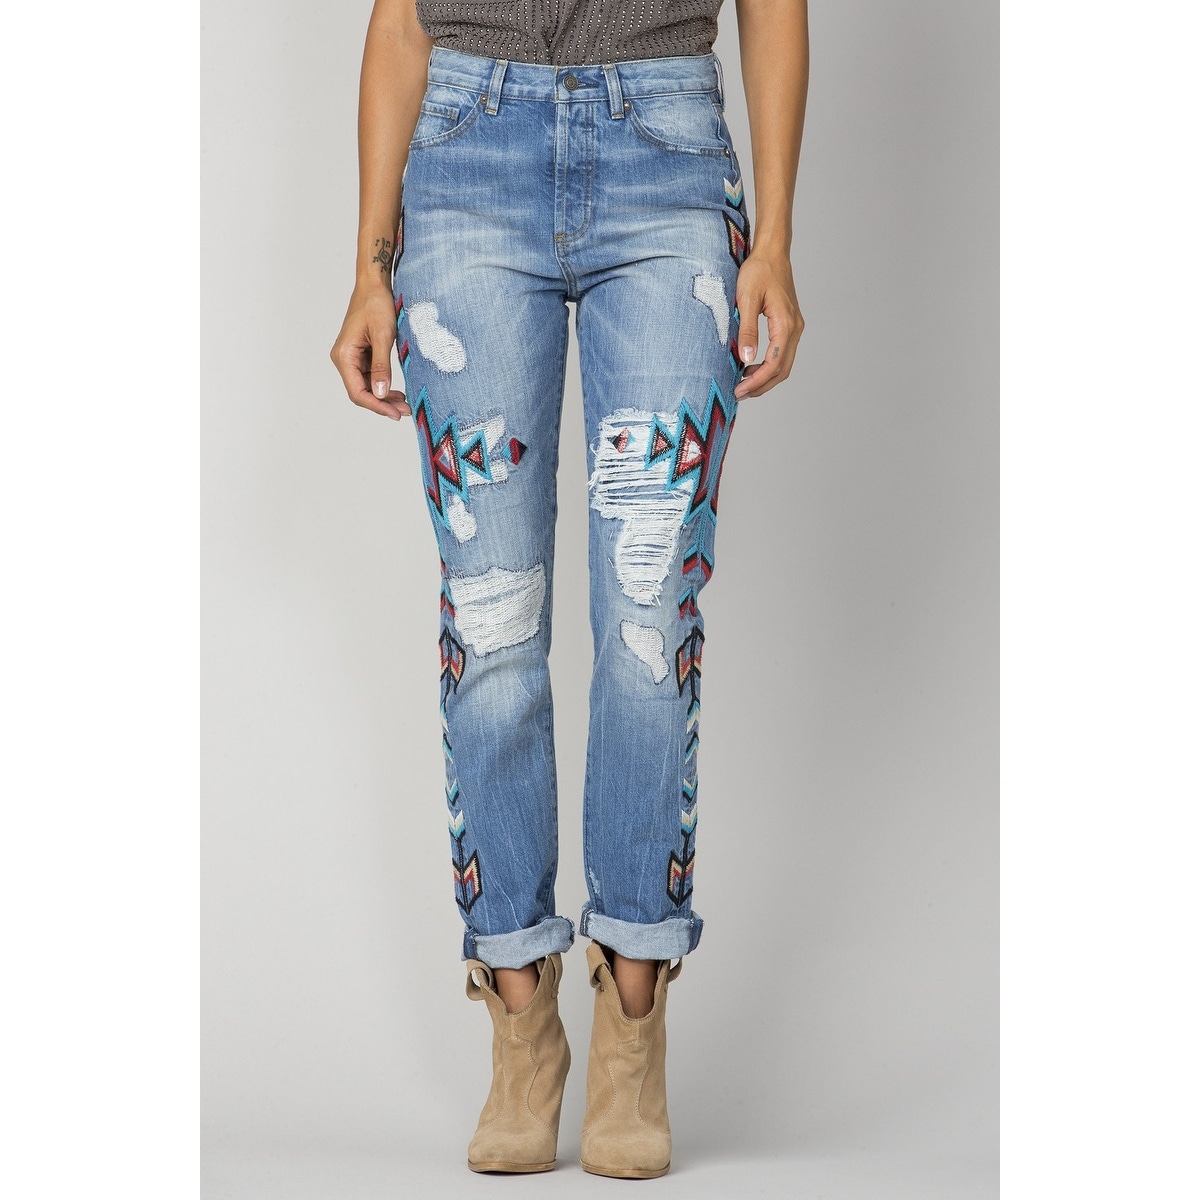 tribal embroidered jeans